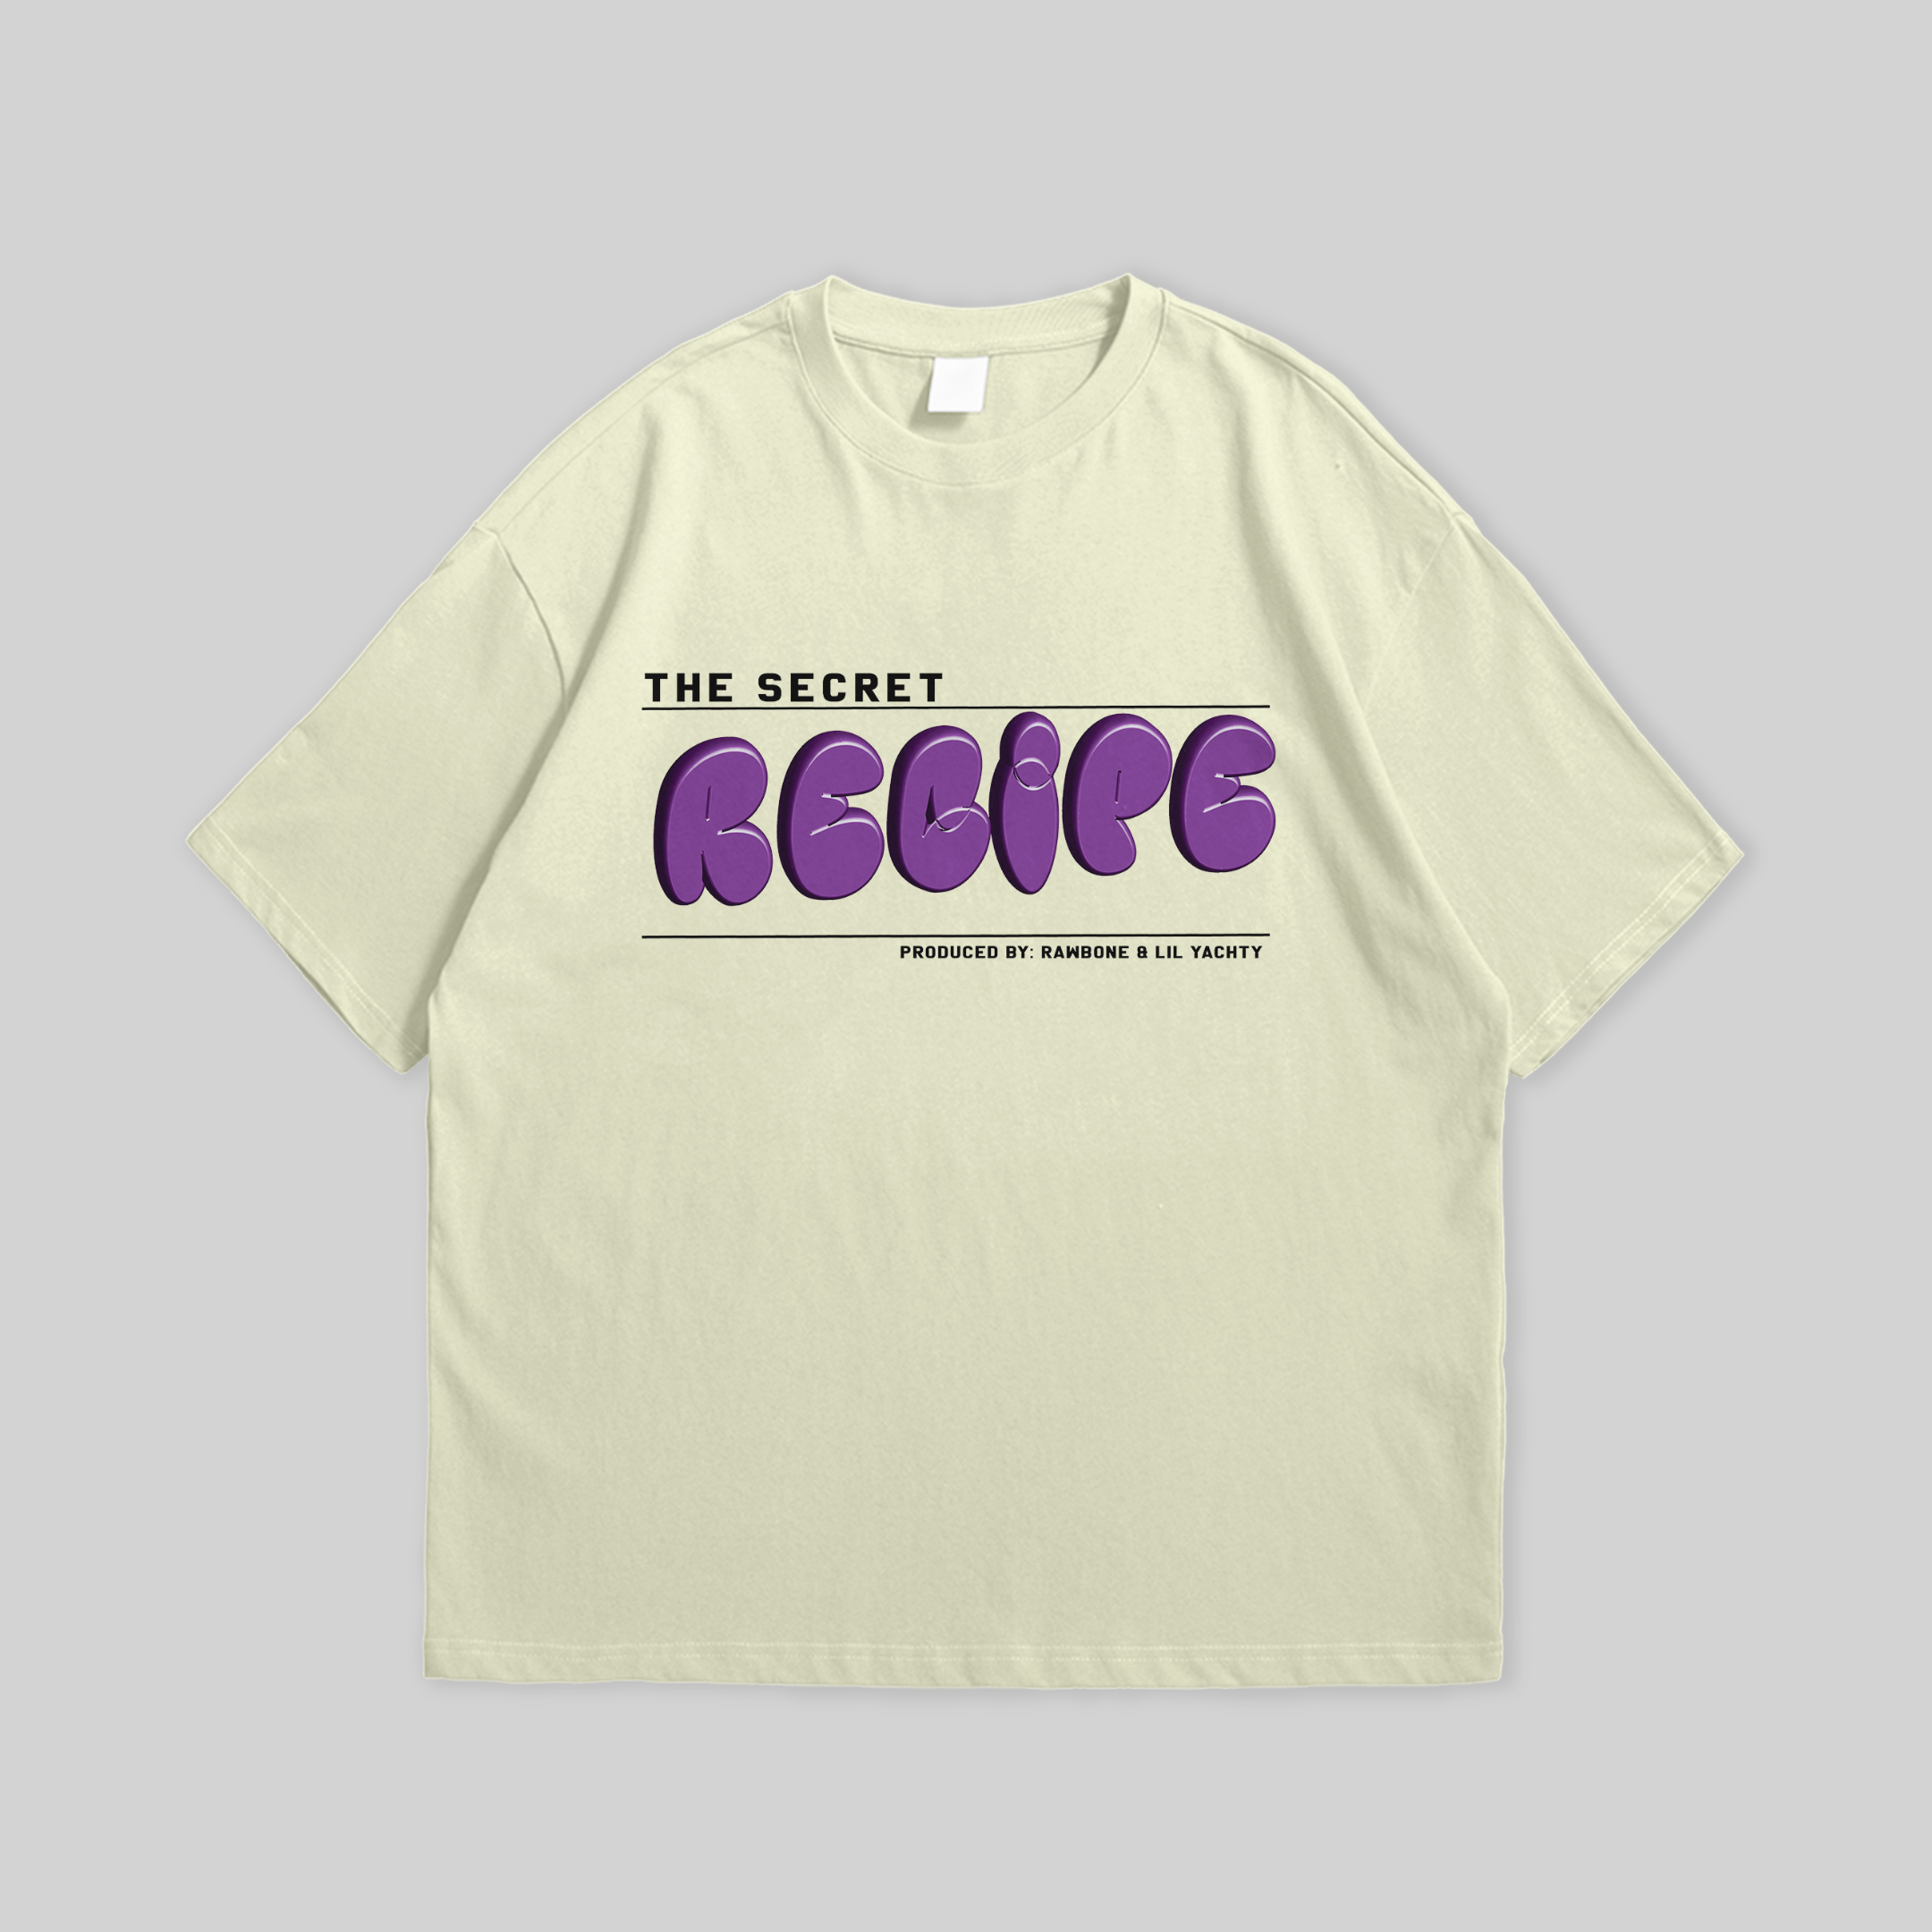 A stylish unisex cream-colored t-shirt featuring a vibrant purple graphic of ‘The Secret Recipe’ and an artistic illustration, perfect for casual wear.